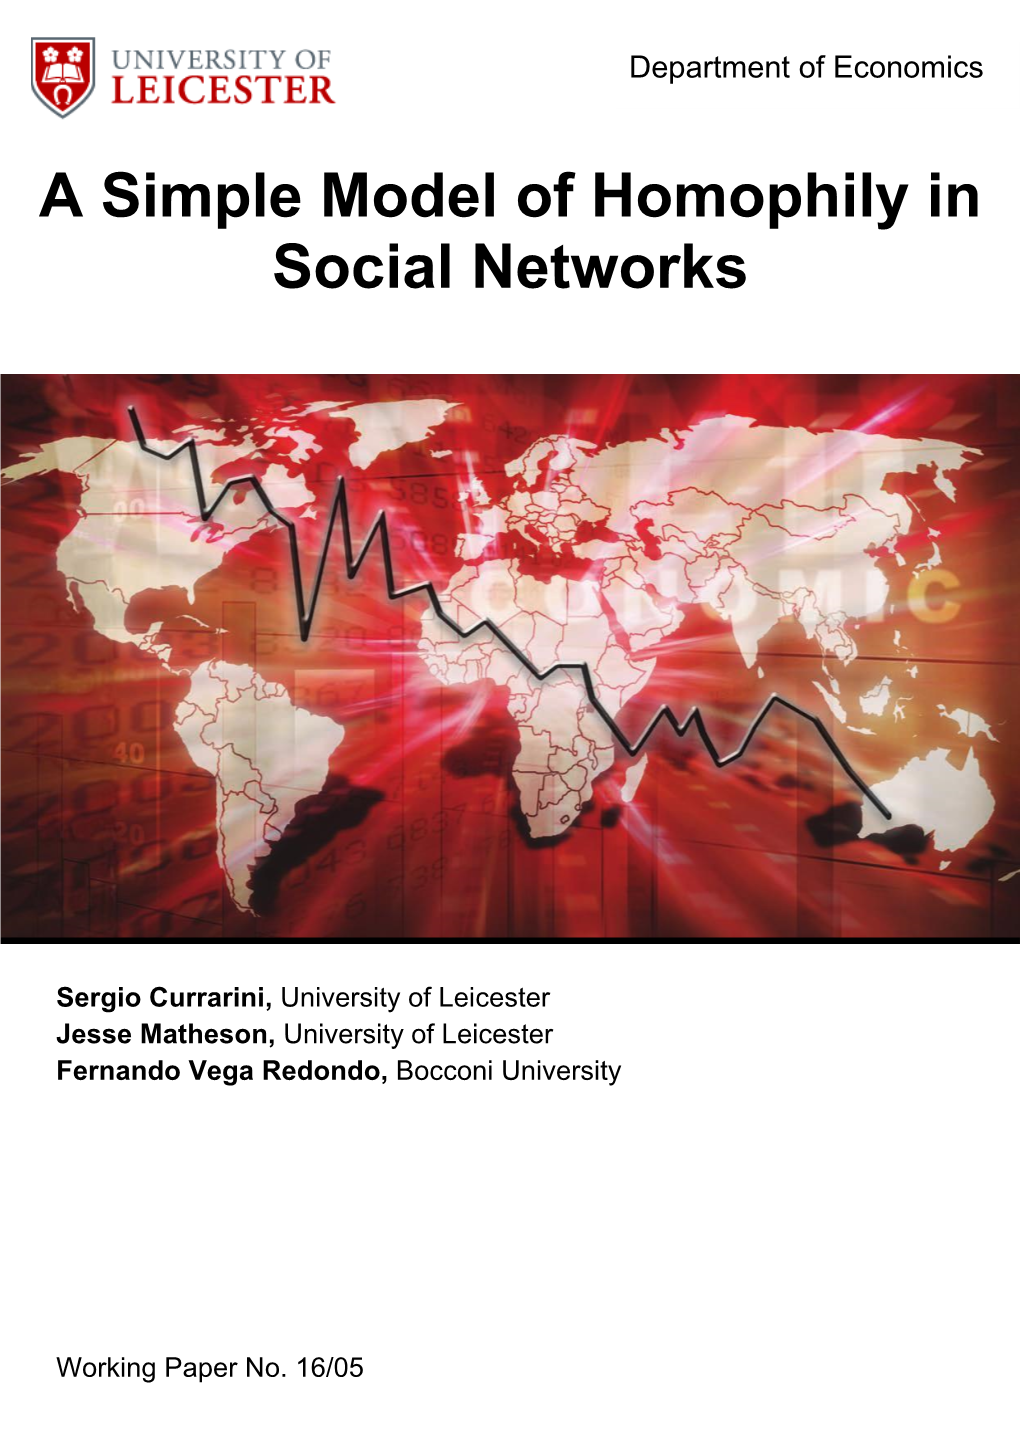 A Simple Model of Homophily in Social Networks